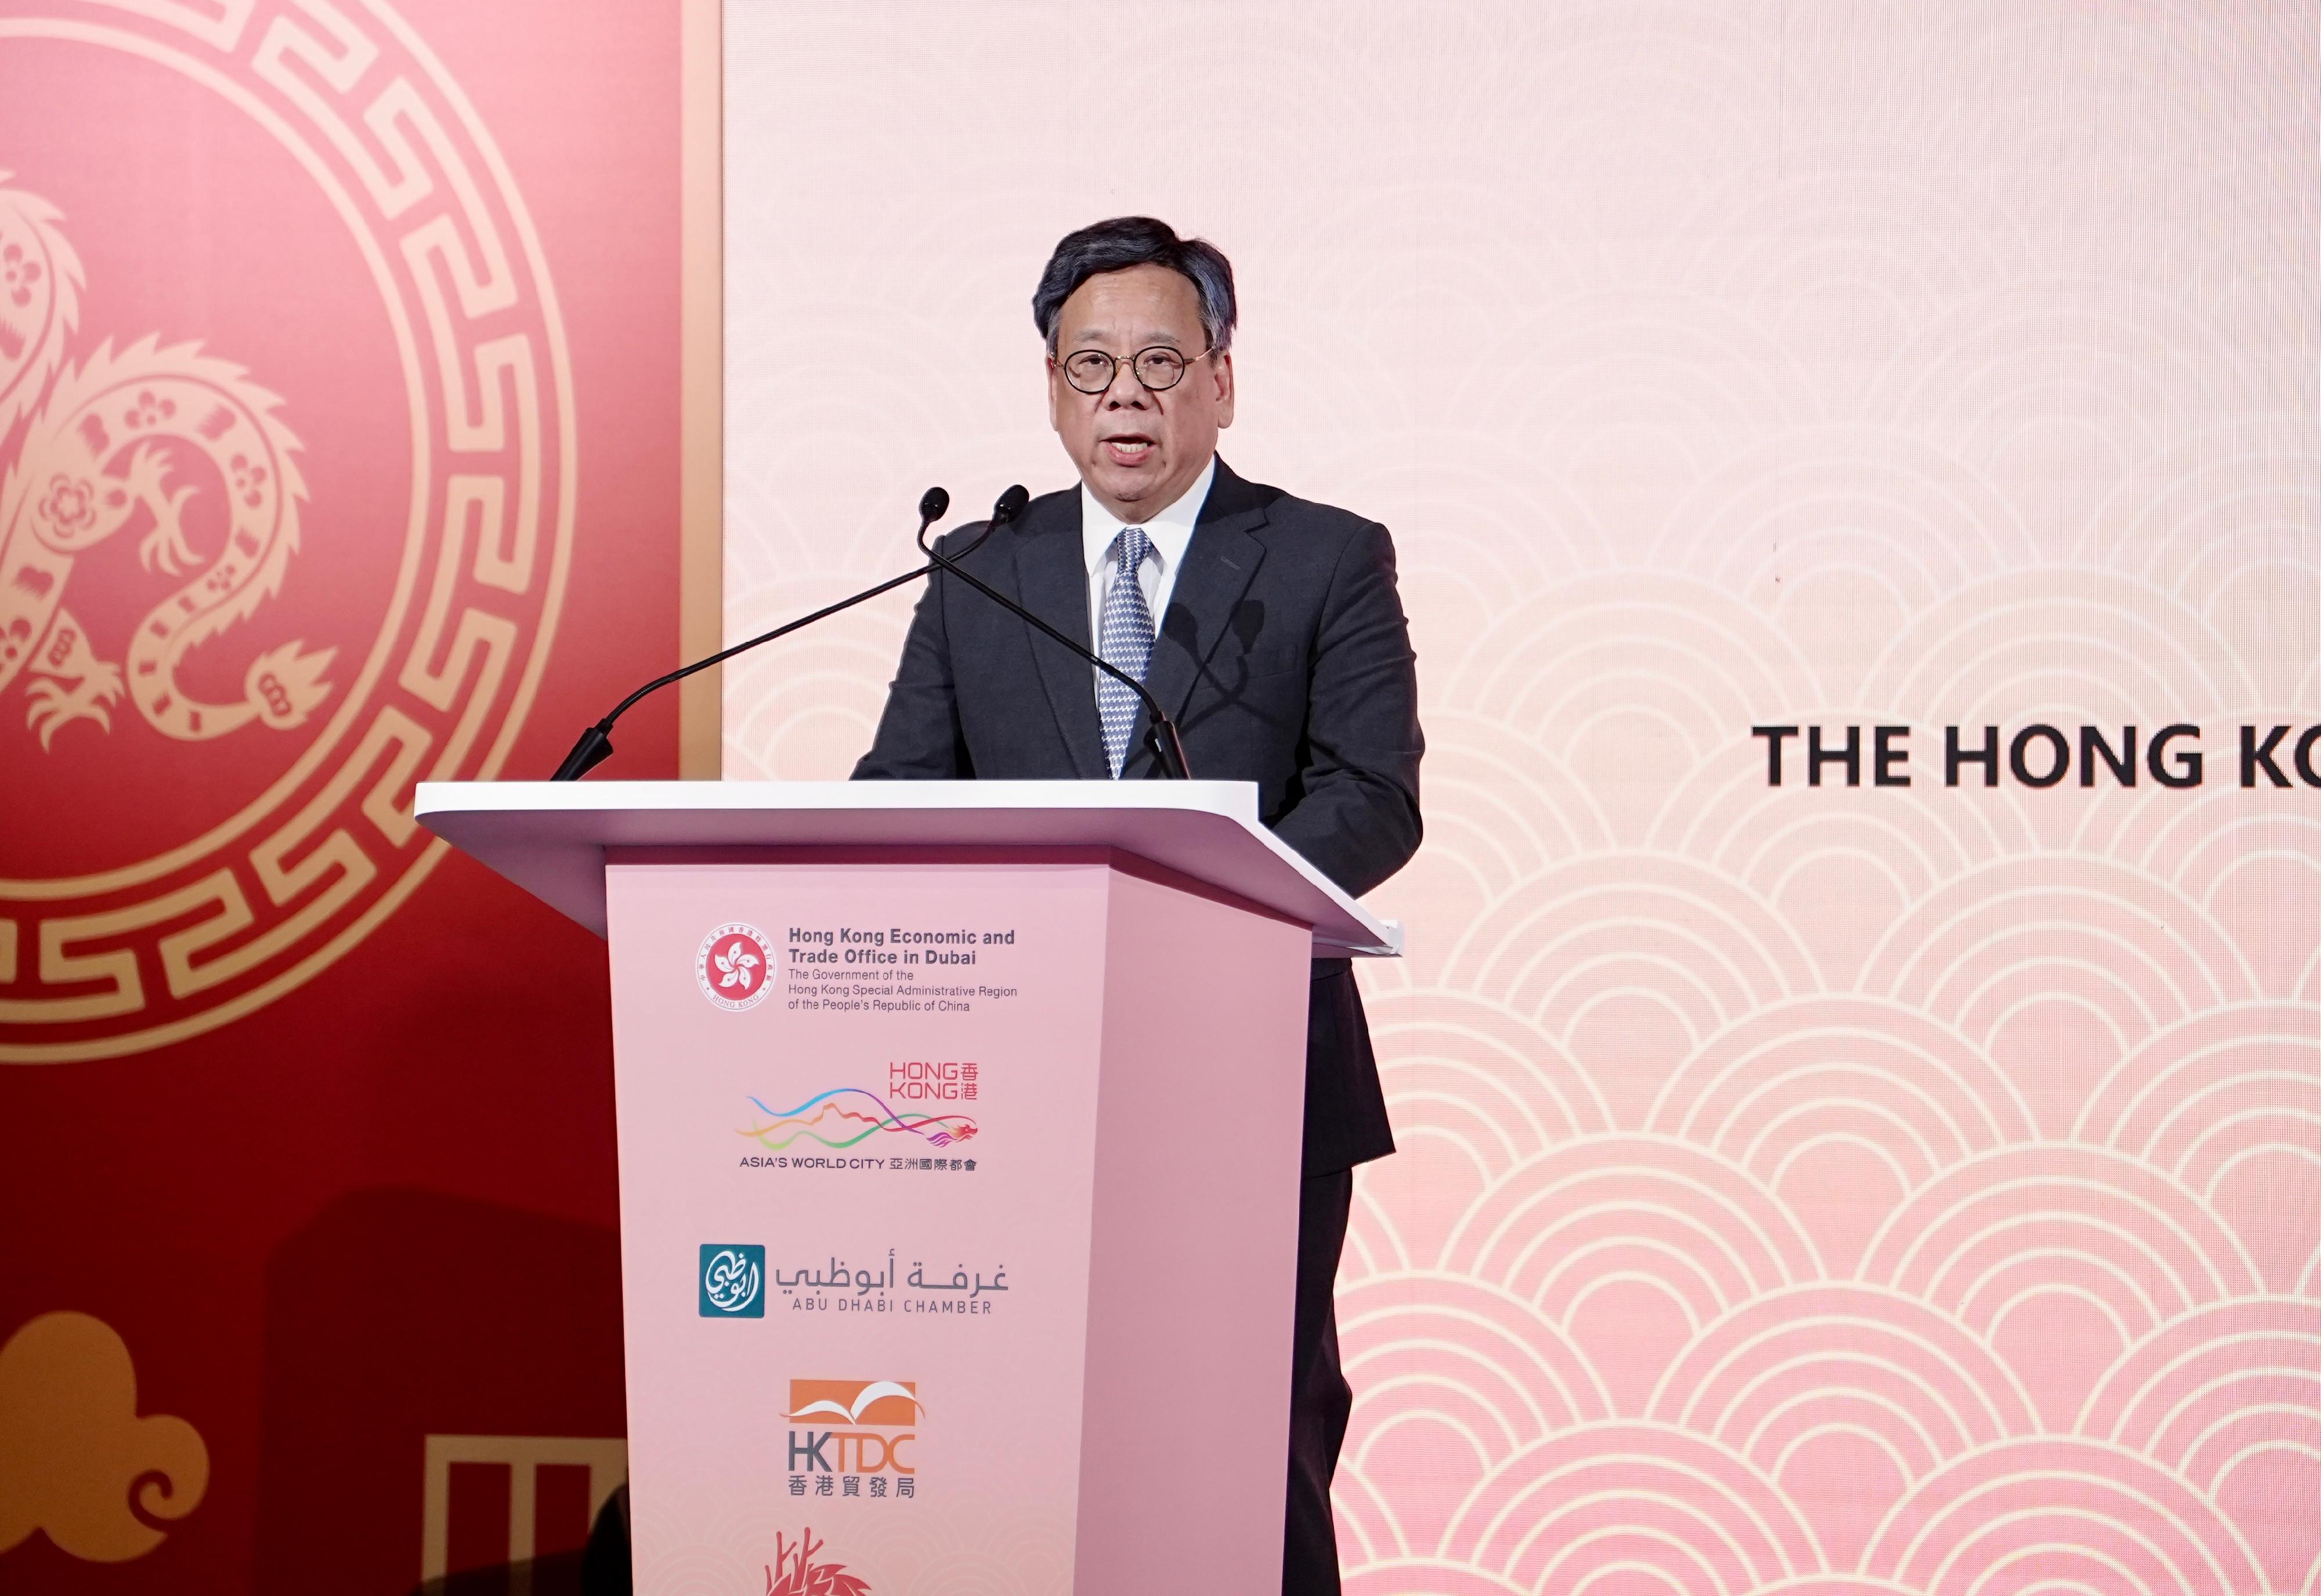 The Hong Kong Economic and Trade Office in Dubai, in collaboration with the Hong Kong Trade Development Council and the Abu Dhabi Chamber of Commerce and Industry, hosted a Chinese New Year dinner reception in Abu Dhabi, the United Arab Emirates, on February 28 (Abu Dhabi time). Photo shows the Secretary for Commerce and Economic Development, Mr Algernon Yau, delivering his keynote address for the evening.